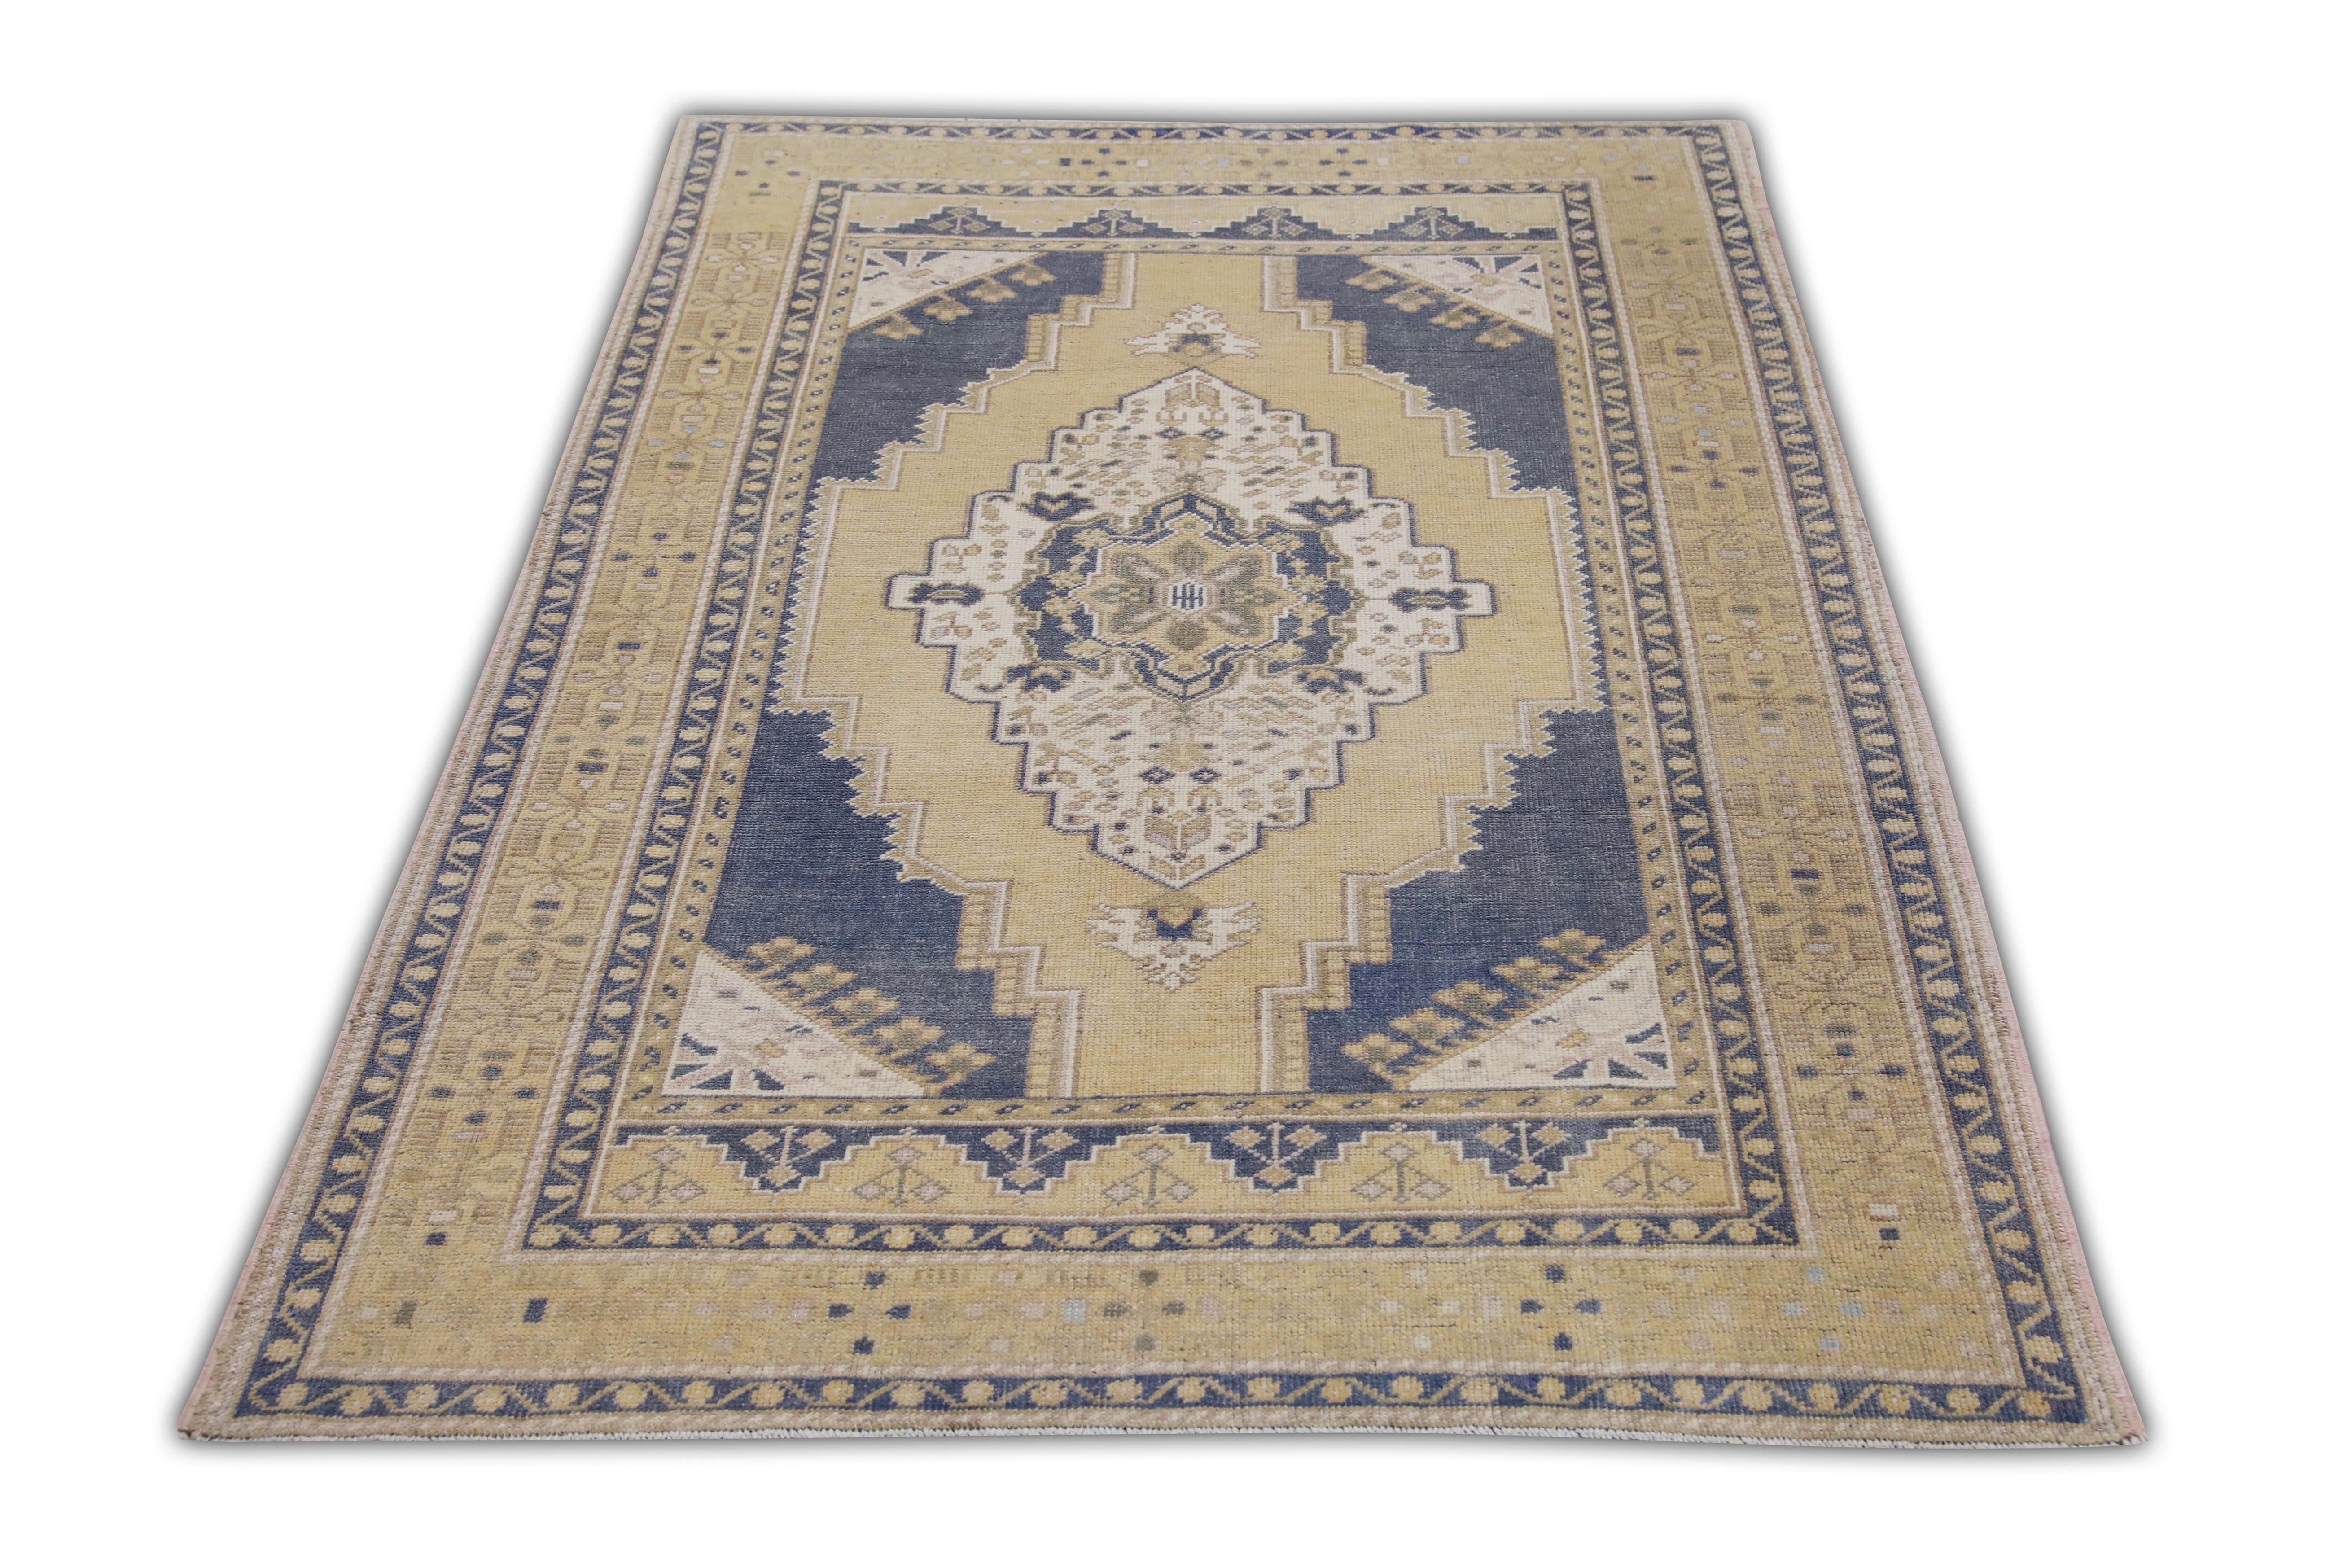 Introducing a one-of-a-kind vintage Turkish hand-knotted wool rug, carefully crafted by skilled artisans using traditional techniques passed down through generations. This exquisite rug boasts a stunning array of natural dyes, resulting in a rich